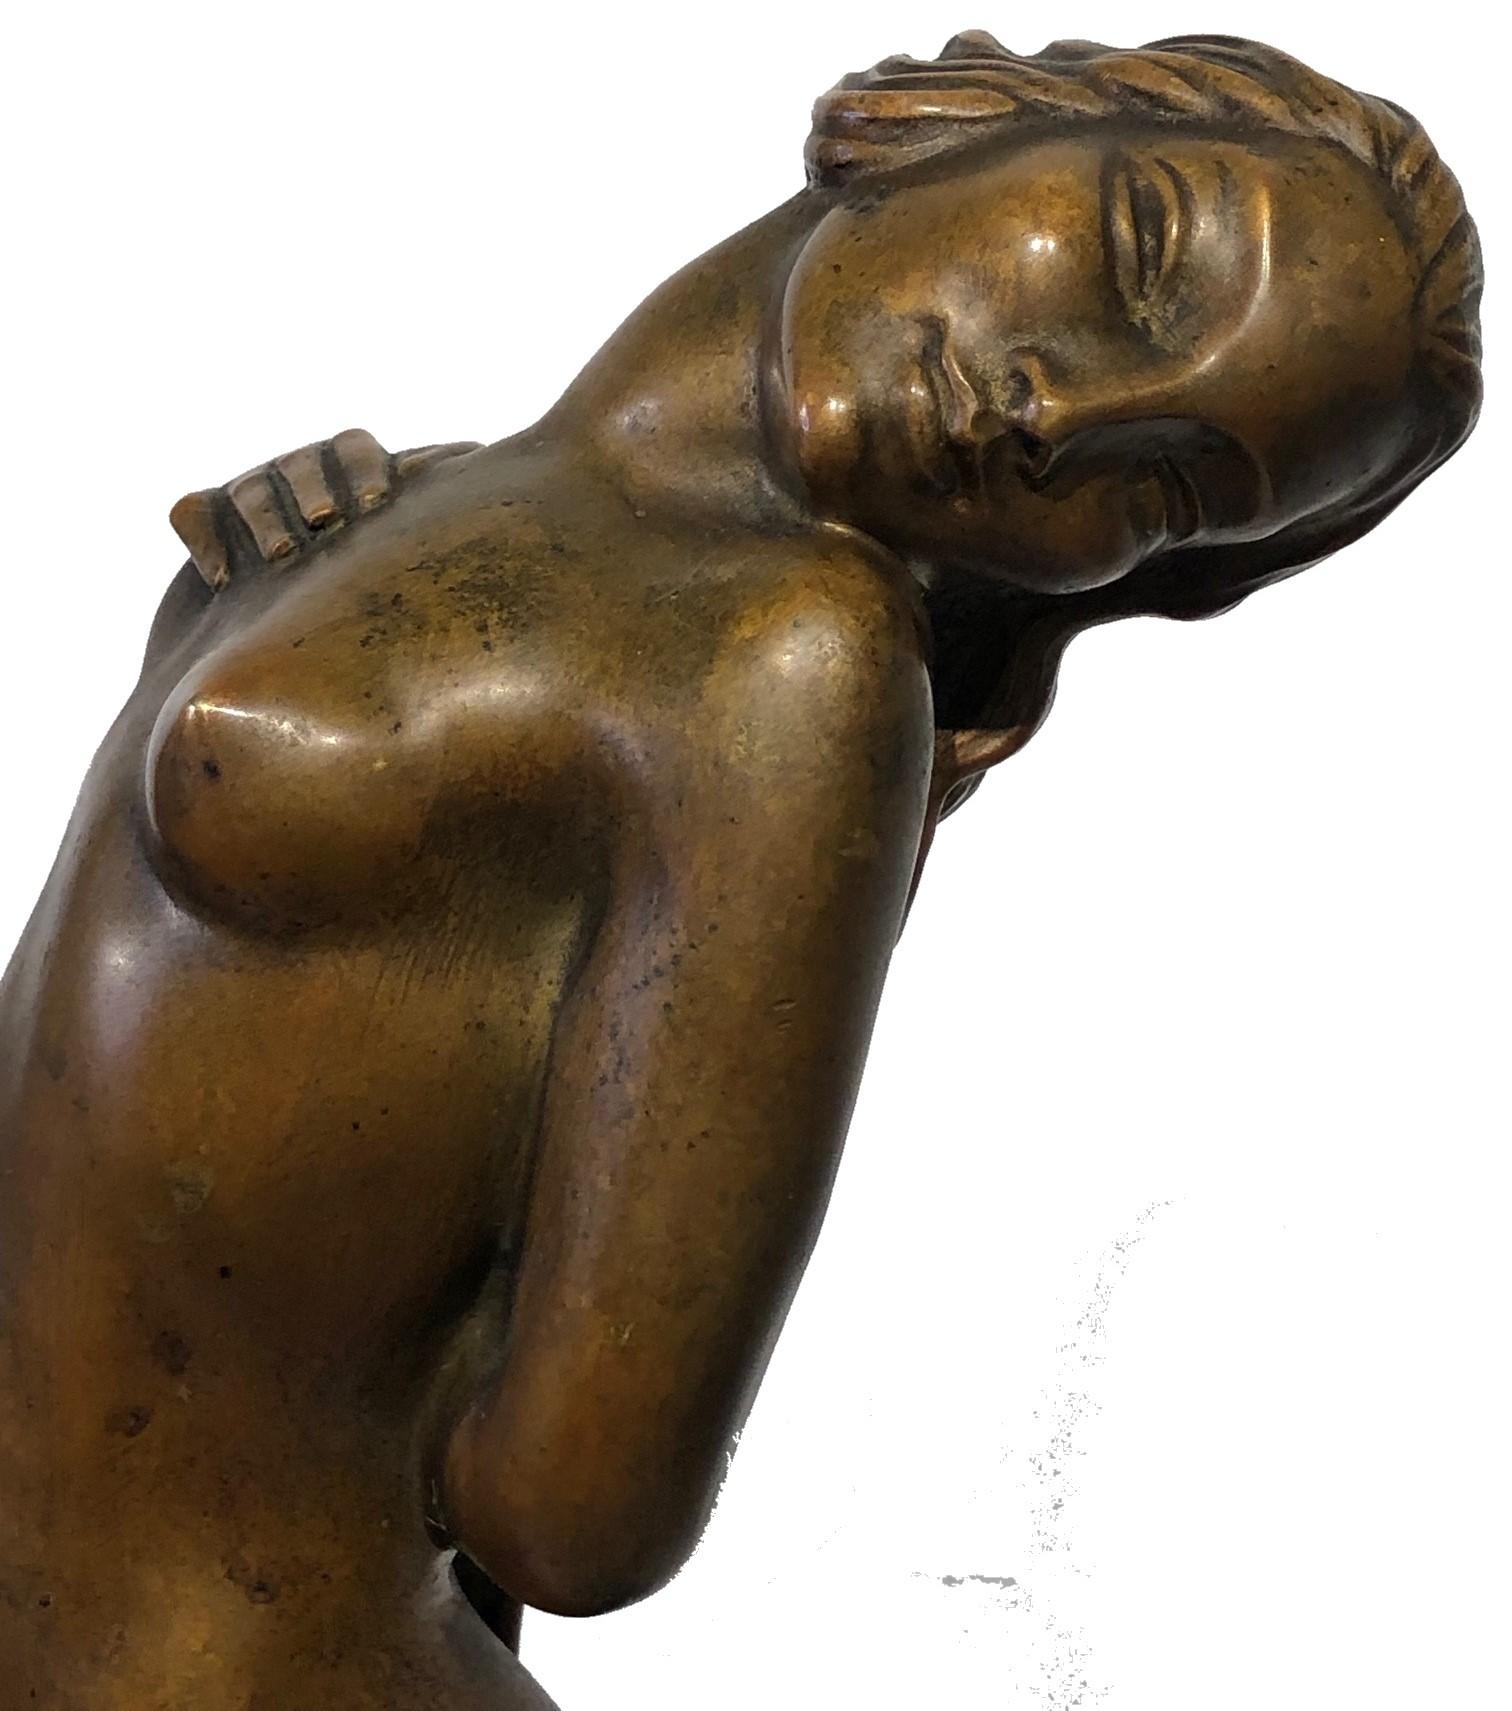 ABOUT
This wonderful sculpture in patinated bronze on an original black granite base depicting a nude young woman emerging from the water was created by Joseph C. Motto (American, 1891-1965) around 1920 and is a reference example of figurative